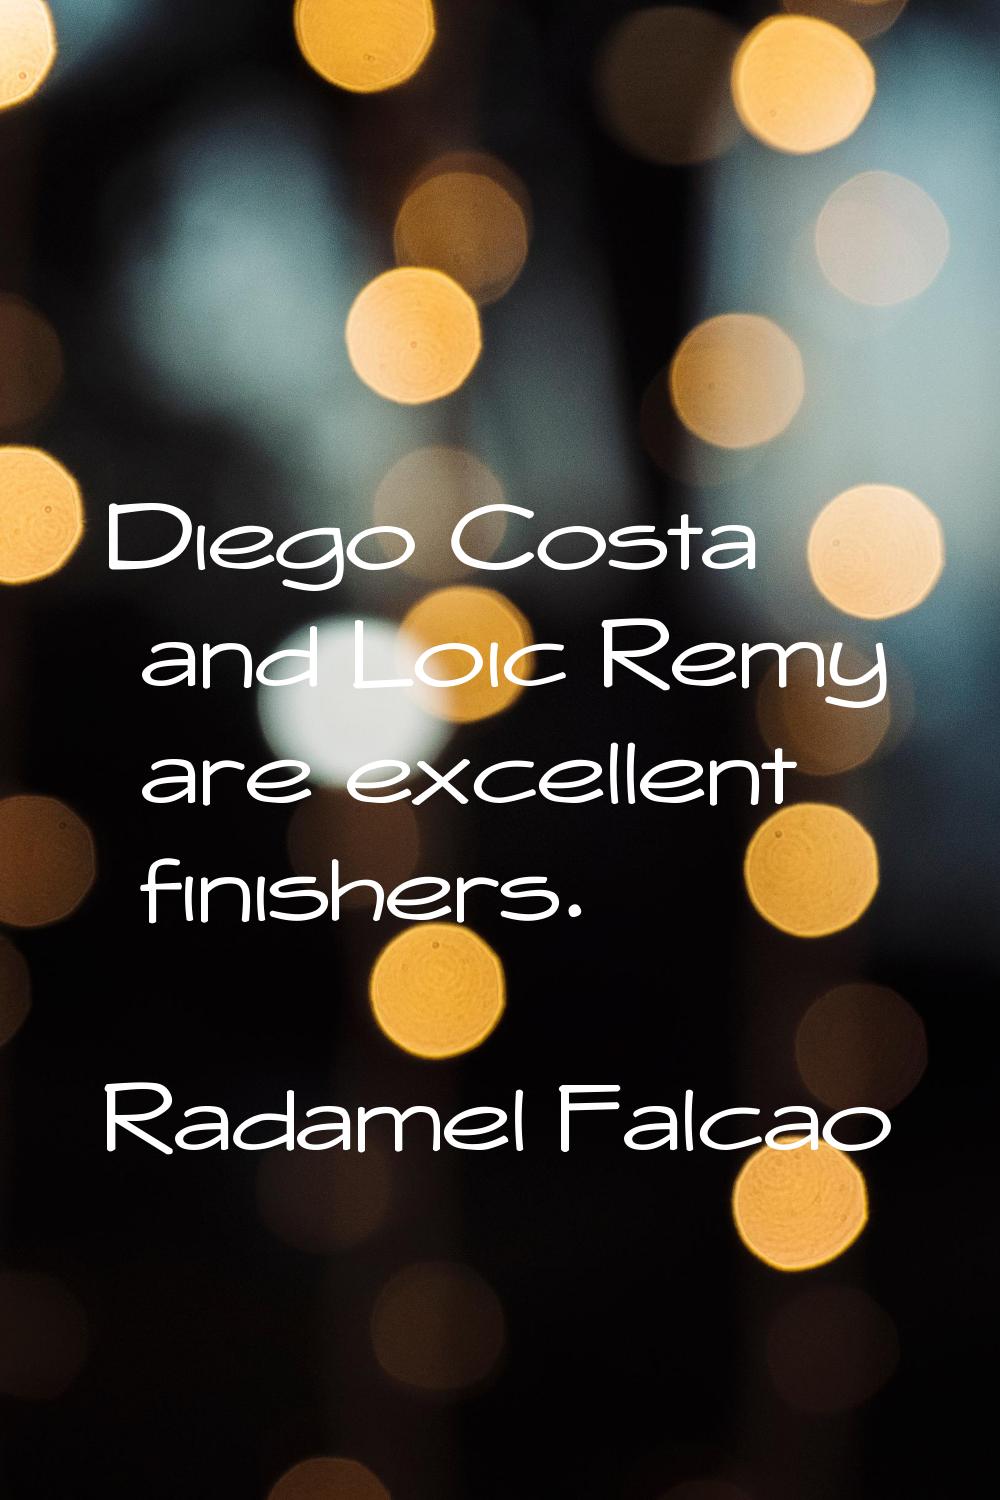 Diego Costa and Loic Remy are excellent finishers.